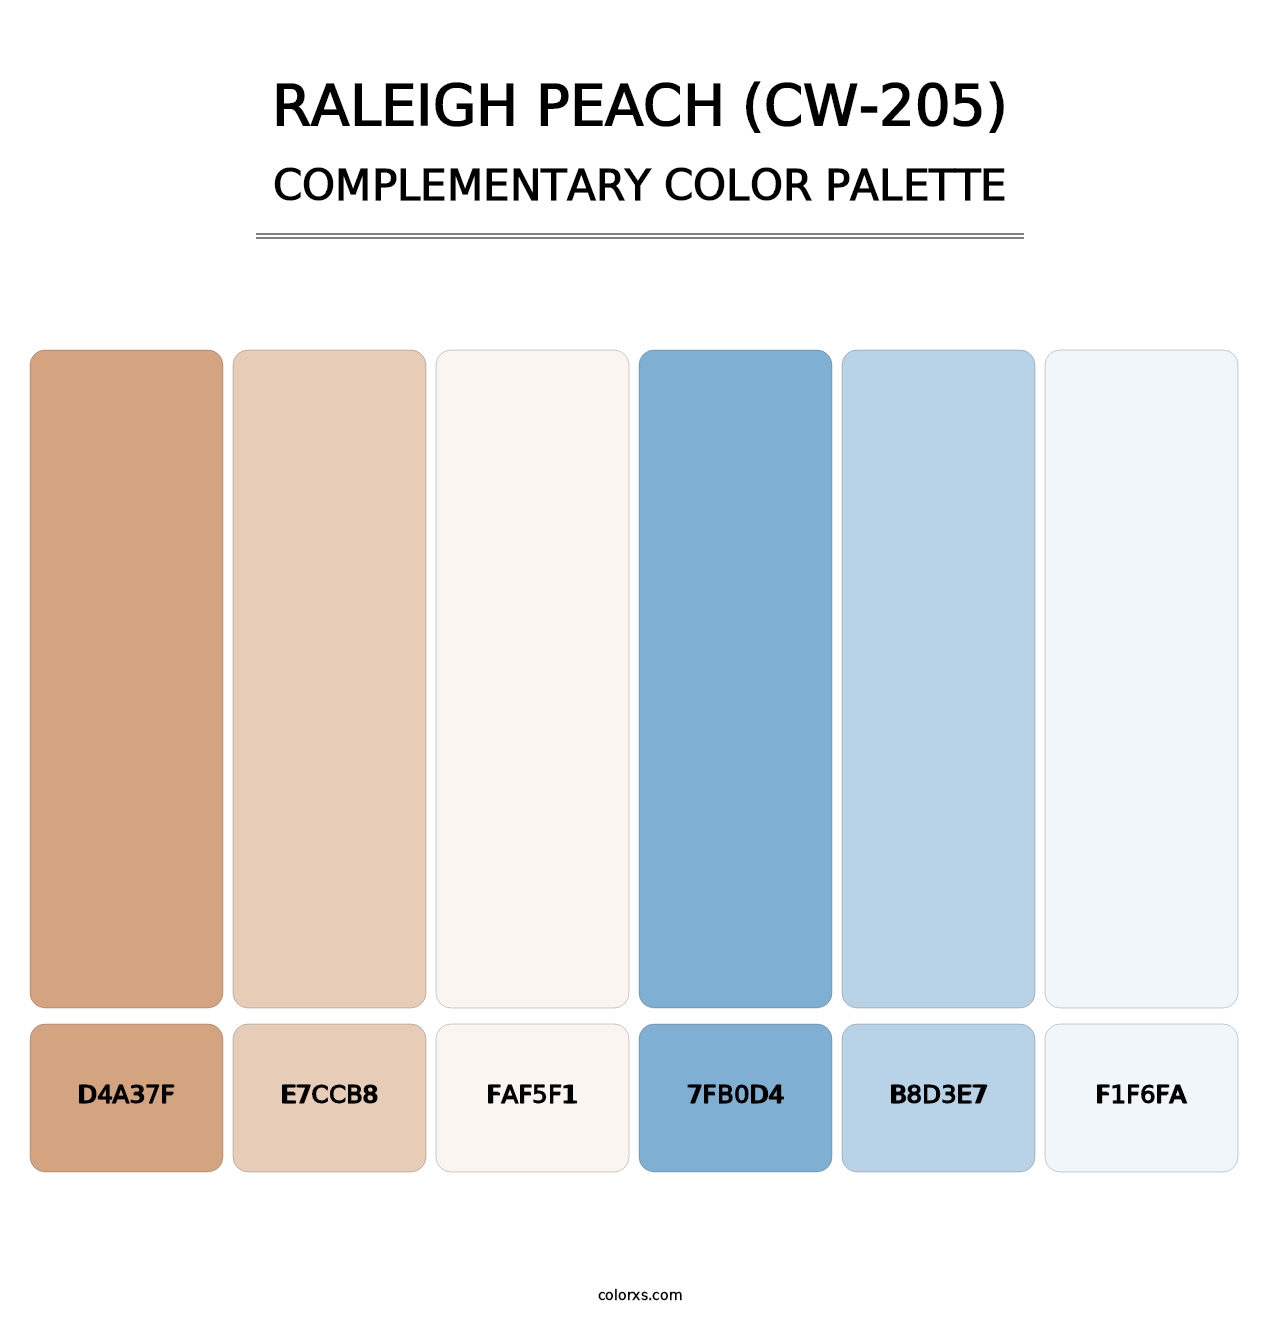 Raleigh Peach (CW-205) - Complementary Color Palette